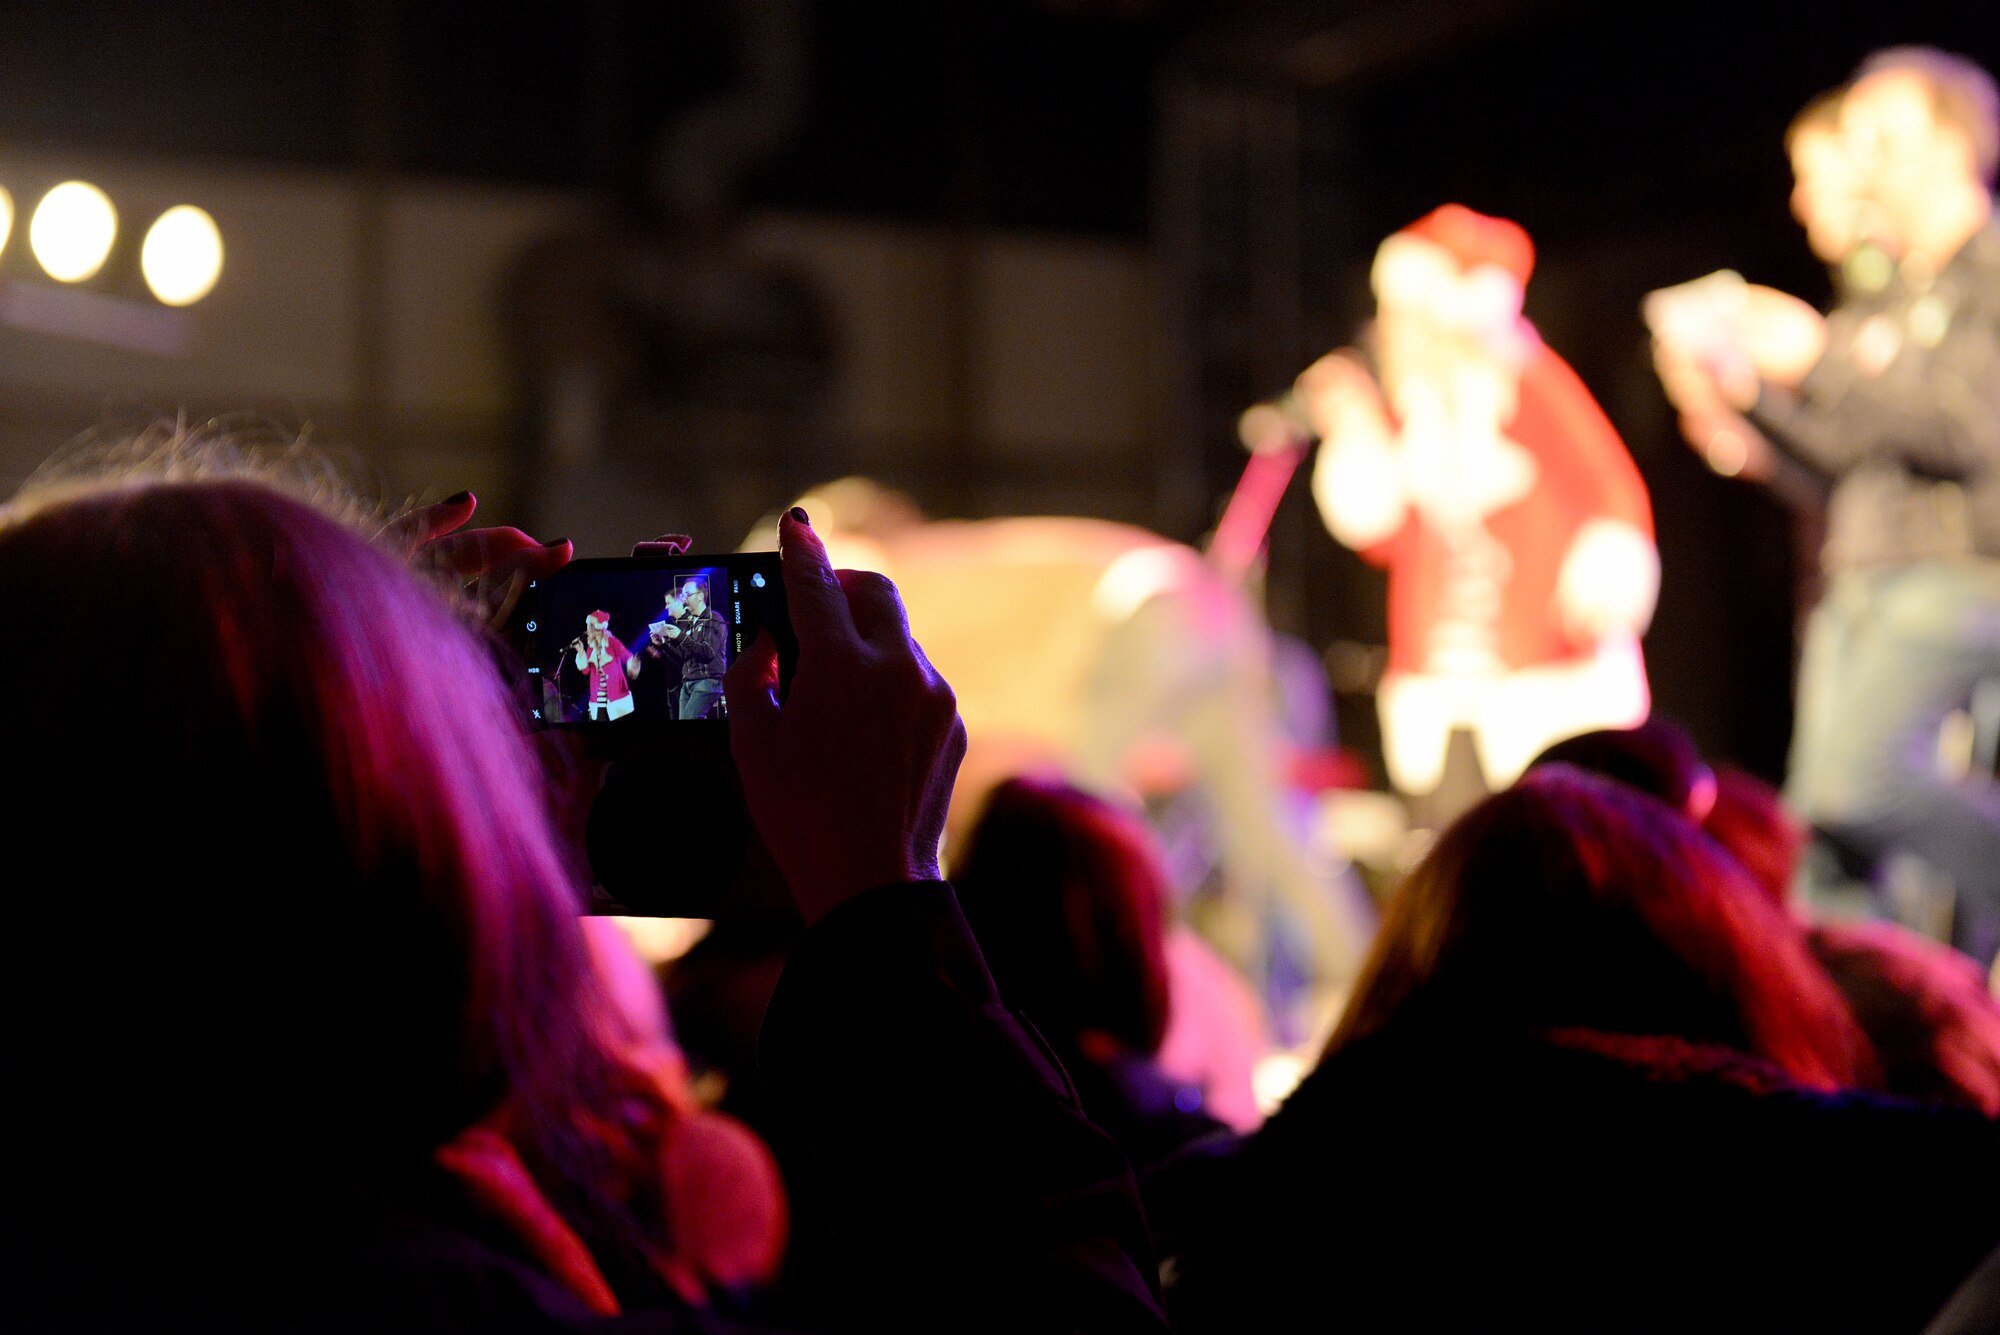 A crowd member takes a photo of participants of the 2015 USO Holiday Troop Tour Dec. 9, 2015, at Ramstein Air Base, Germany. Participants included actors Elizabeth Banks and David Wain as well as Boston Red Sox players Heath Hembree and Steven Wright. The tour is a way to say thanks to the service members and their families. (U.S. Air Force photo/Staff Sgt. Timothy Moore)